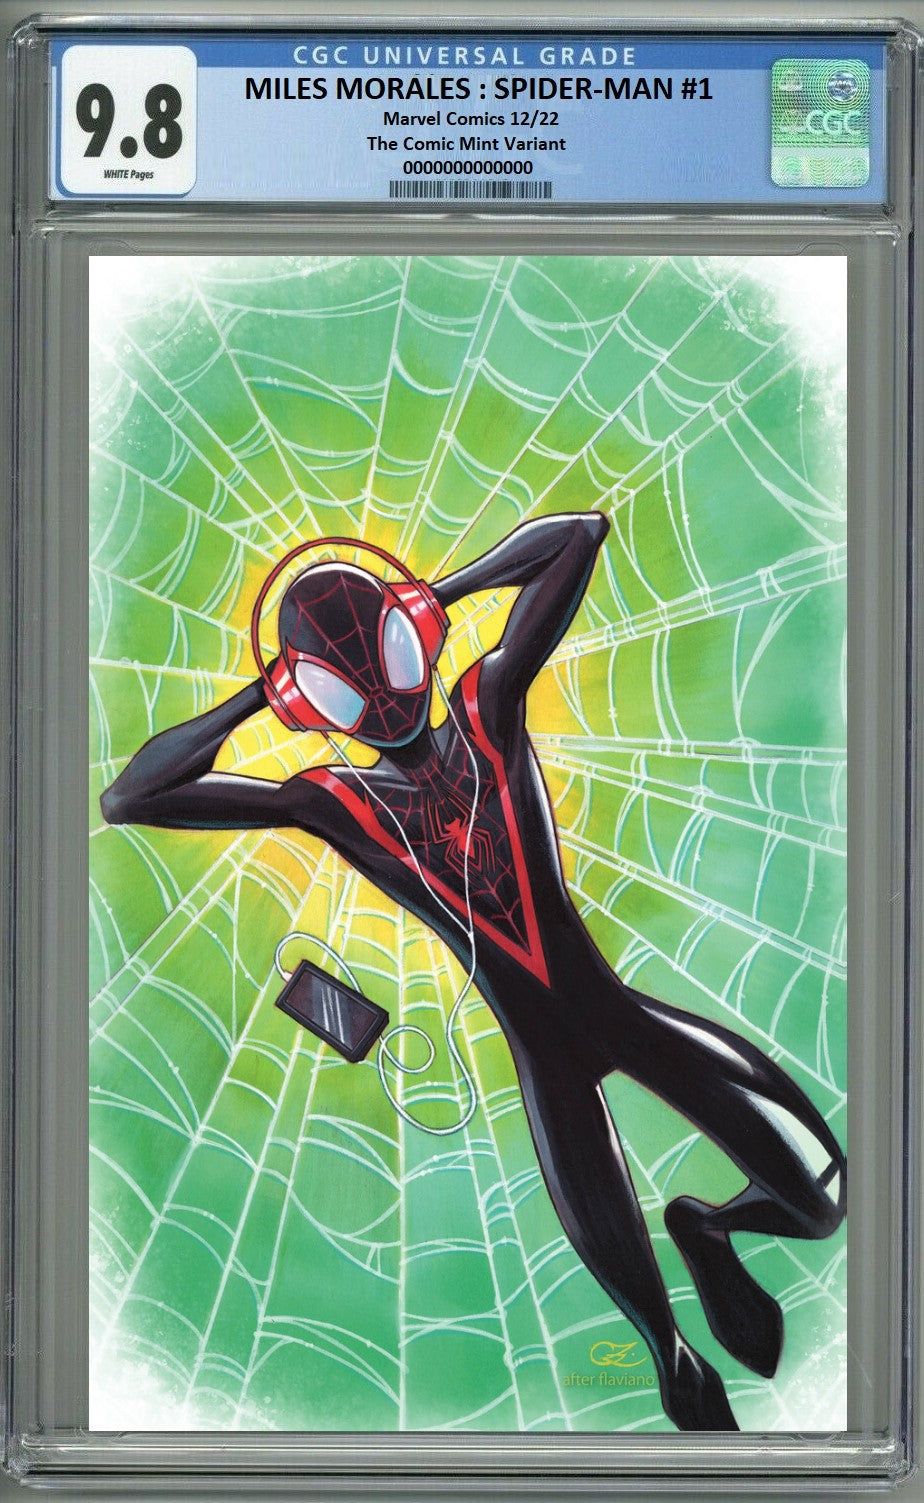 MILES MORALES SPIDER-MAN #1 CHRISSIE ZULLO VIRGIN VARIANT LIMITED TO 500 COPIES WITH NUMBERED COA CGC 9.8